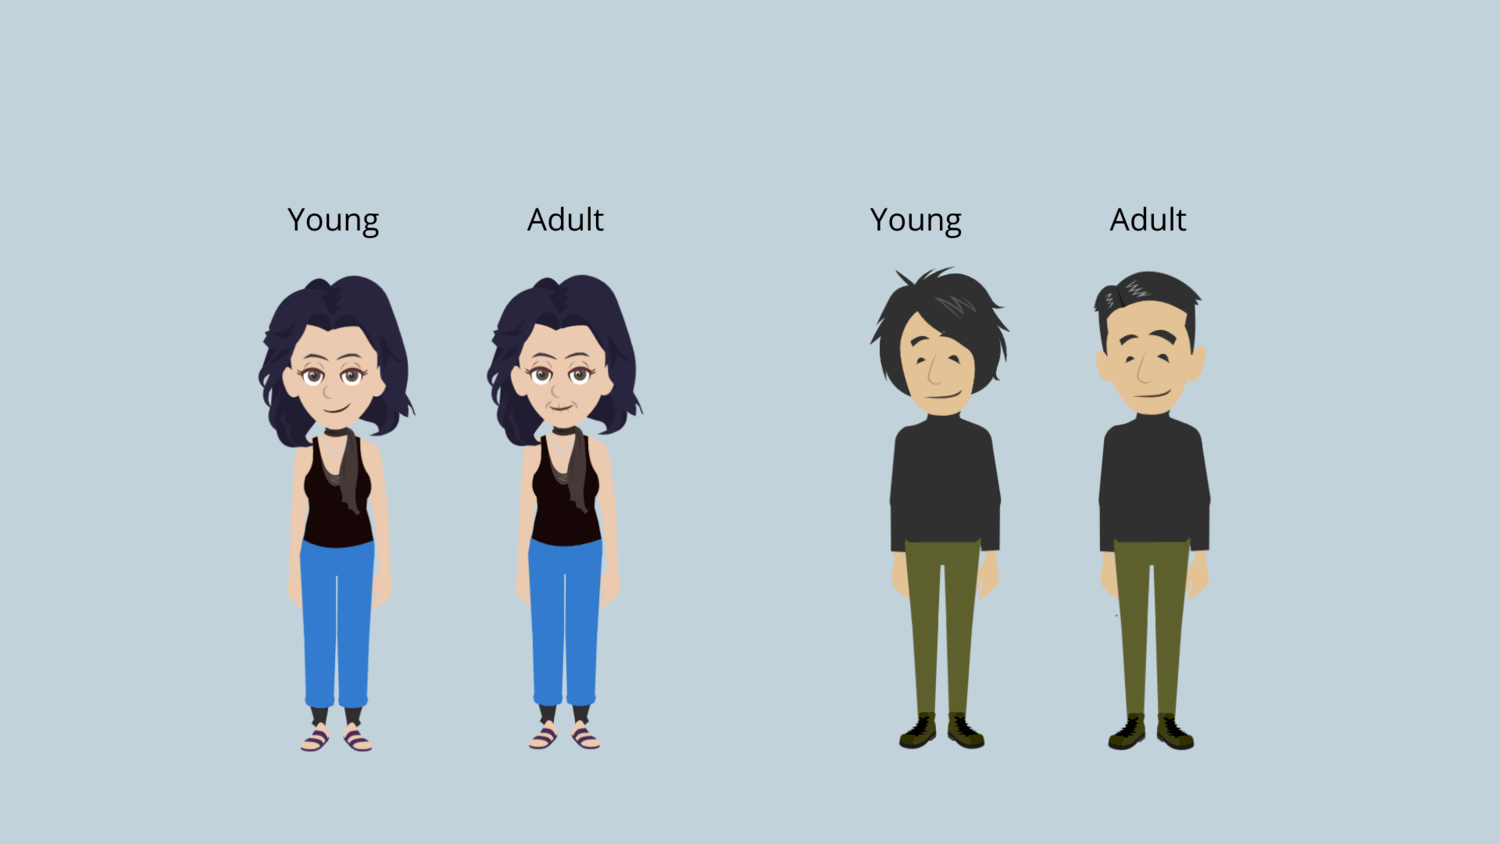 A comparison of two different characters, each with a "young" and "adult" version, to show off two different styles available in Vyond.